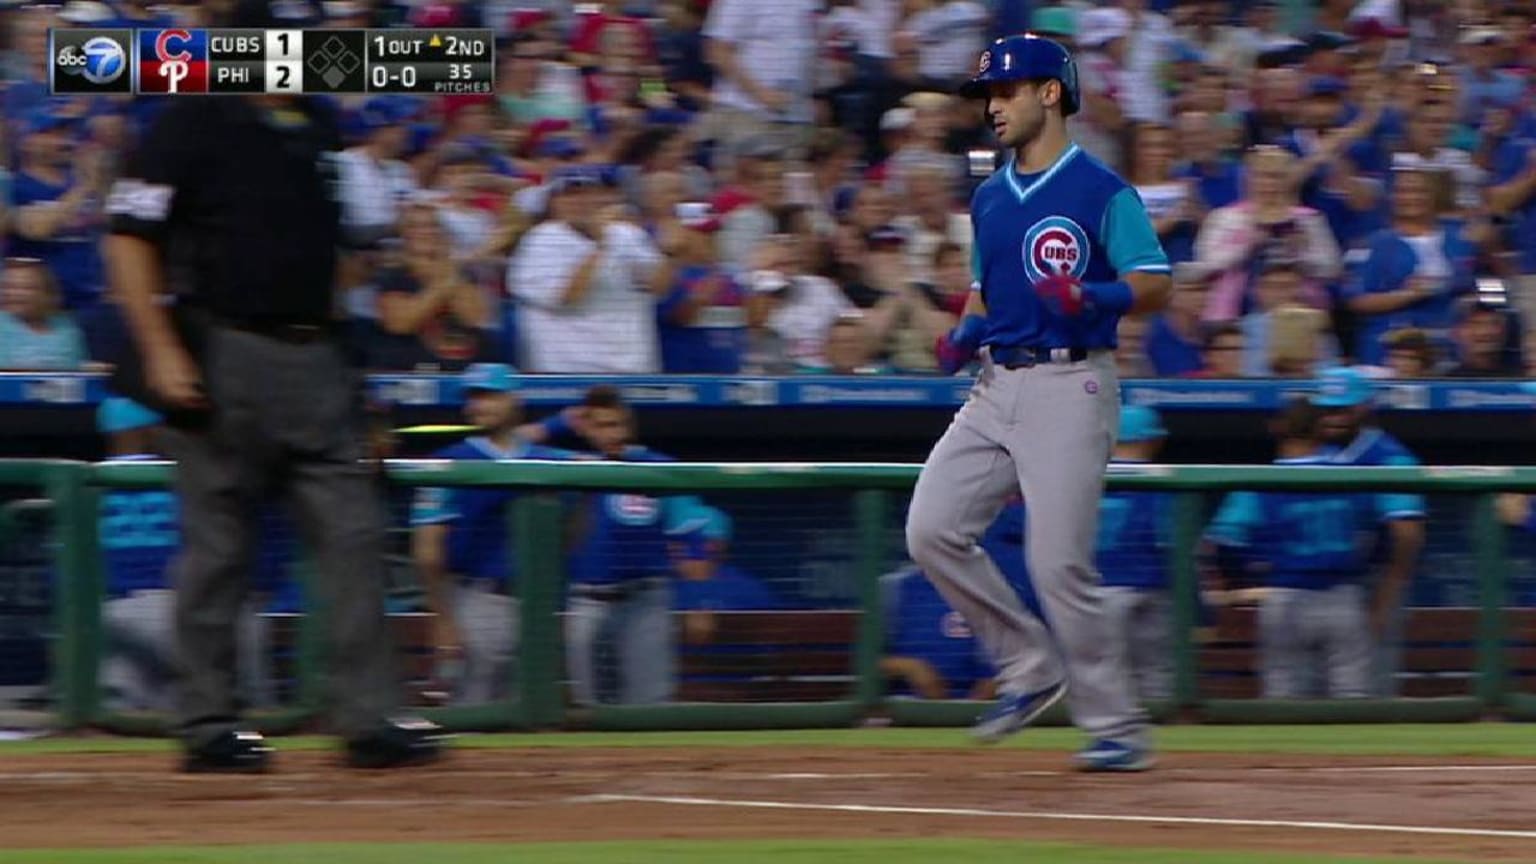 Cubs’ bats break out of slump starting with a bunt - Los